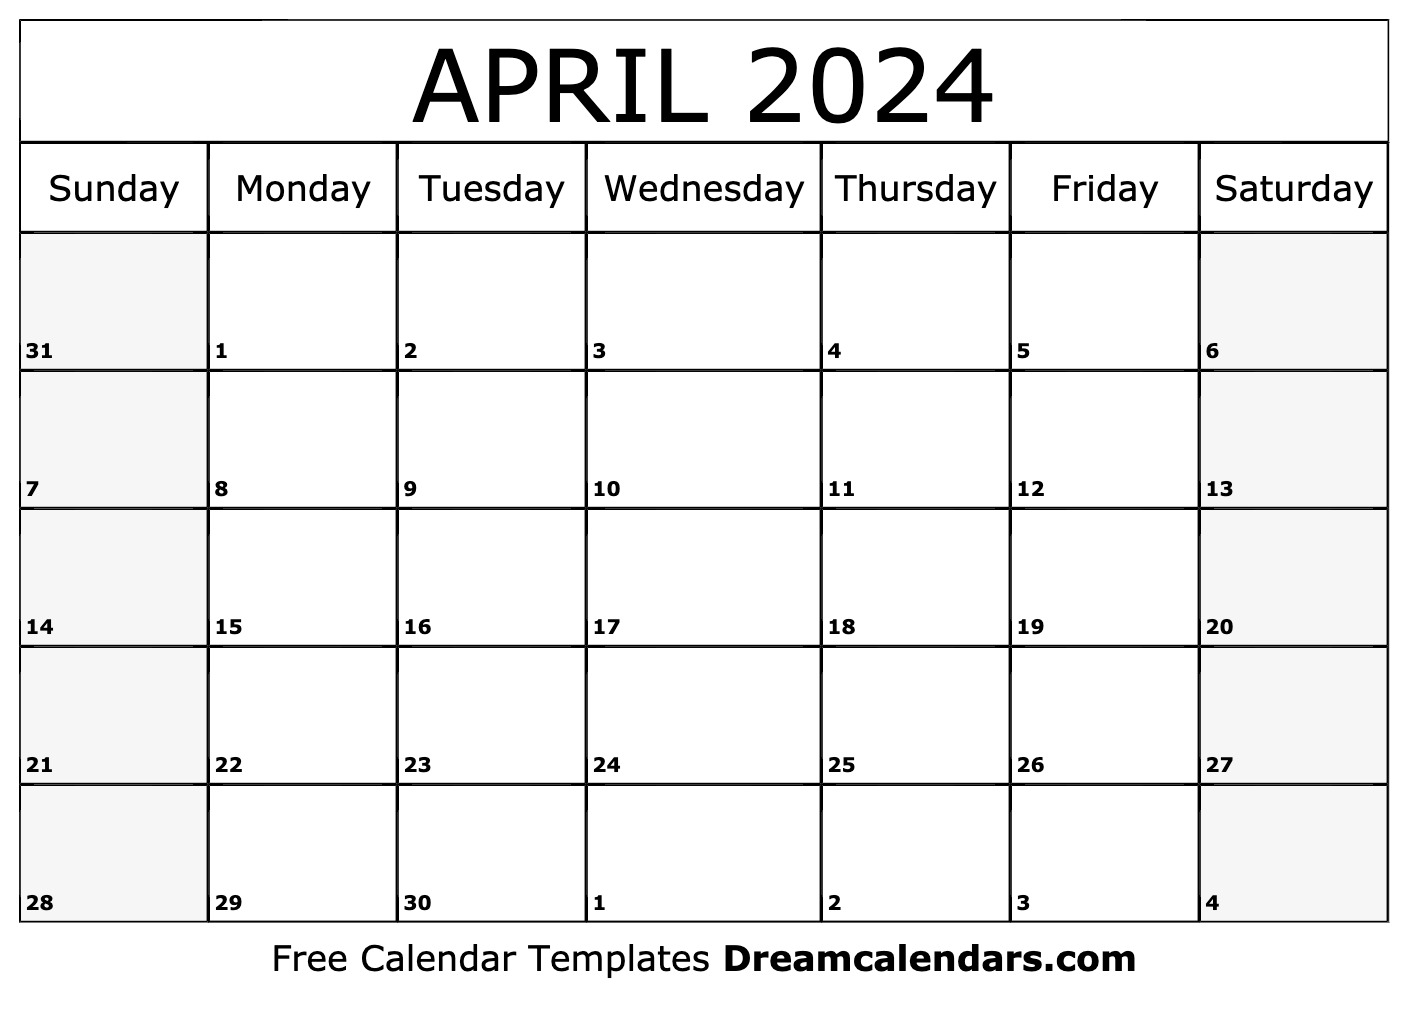 April Calendar Topper 2024 Cool Ultimate The Best Incredible Moon